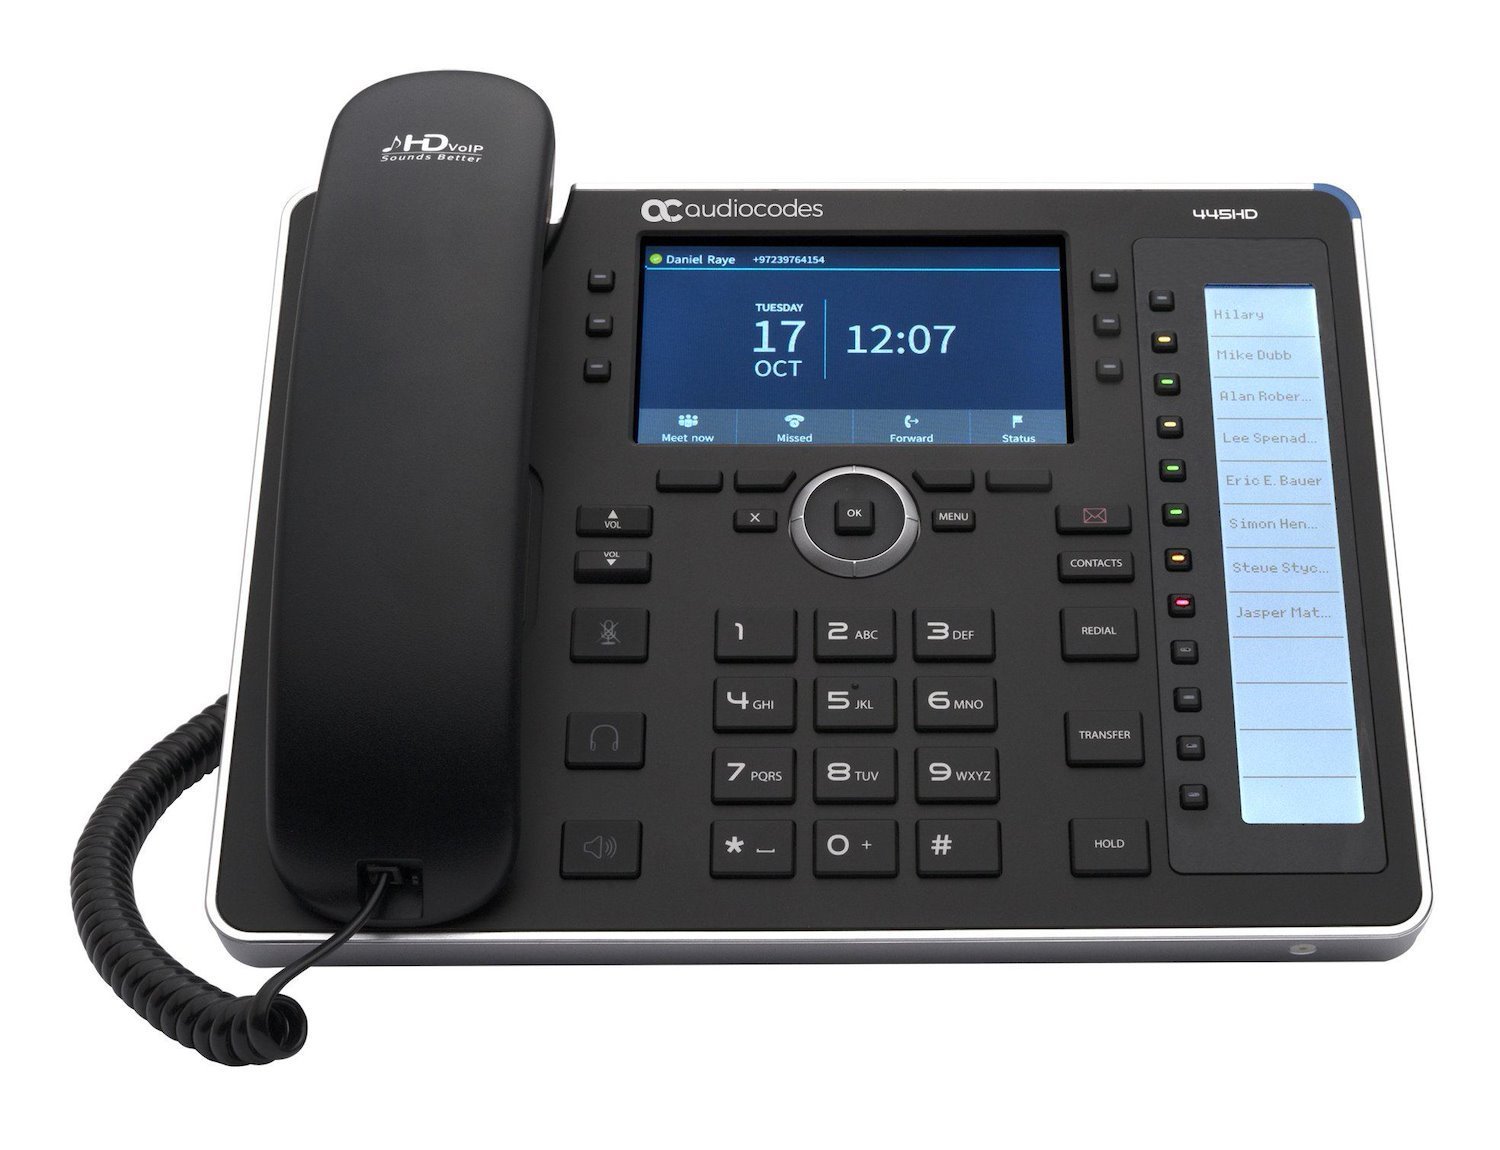 AudioCodes 445HD IP-Phone PoE GbE Black With Integrated BT And Dual Band Wi-Fi (Audiocodes Ip445hdeg-Dbw Phone)